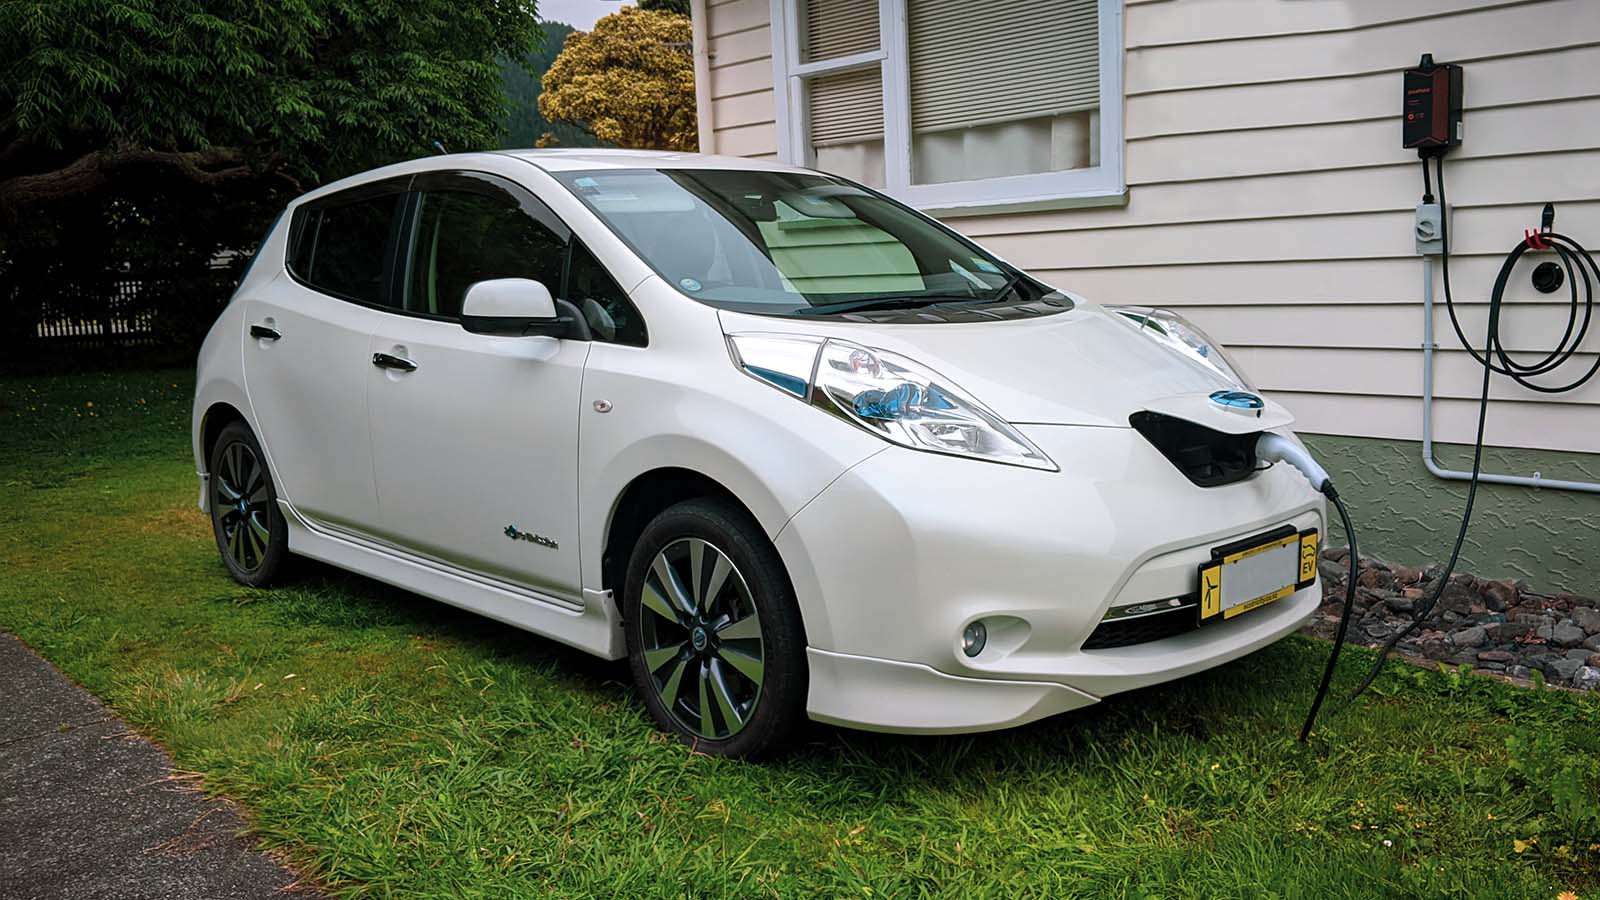 Nissan Leaf is Aotearoa New Zealand's most popular used electric vehicle